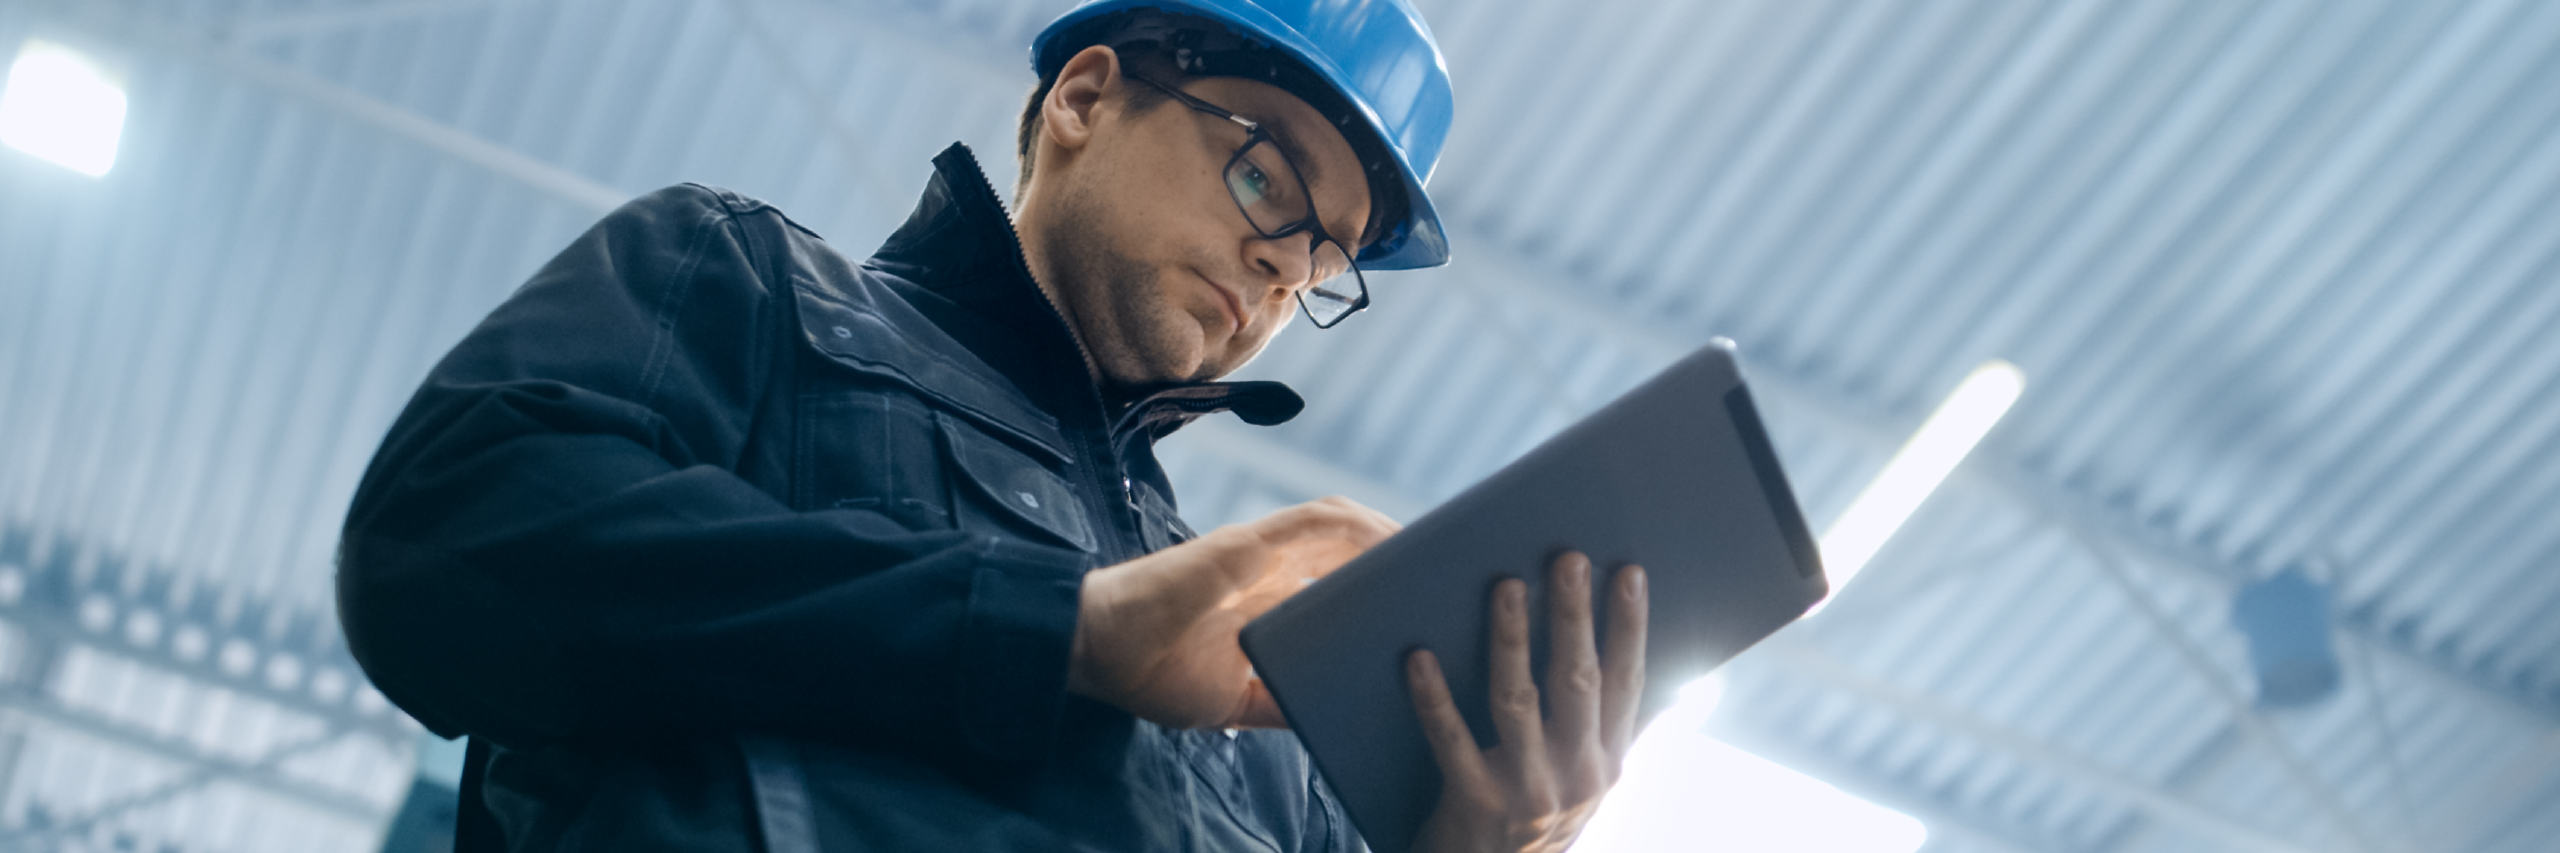 An inspector wearing a hard hat and holding a tablet